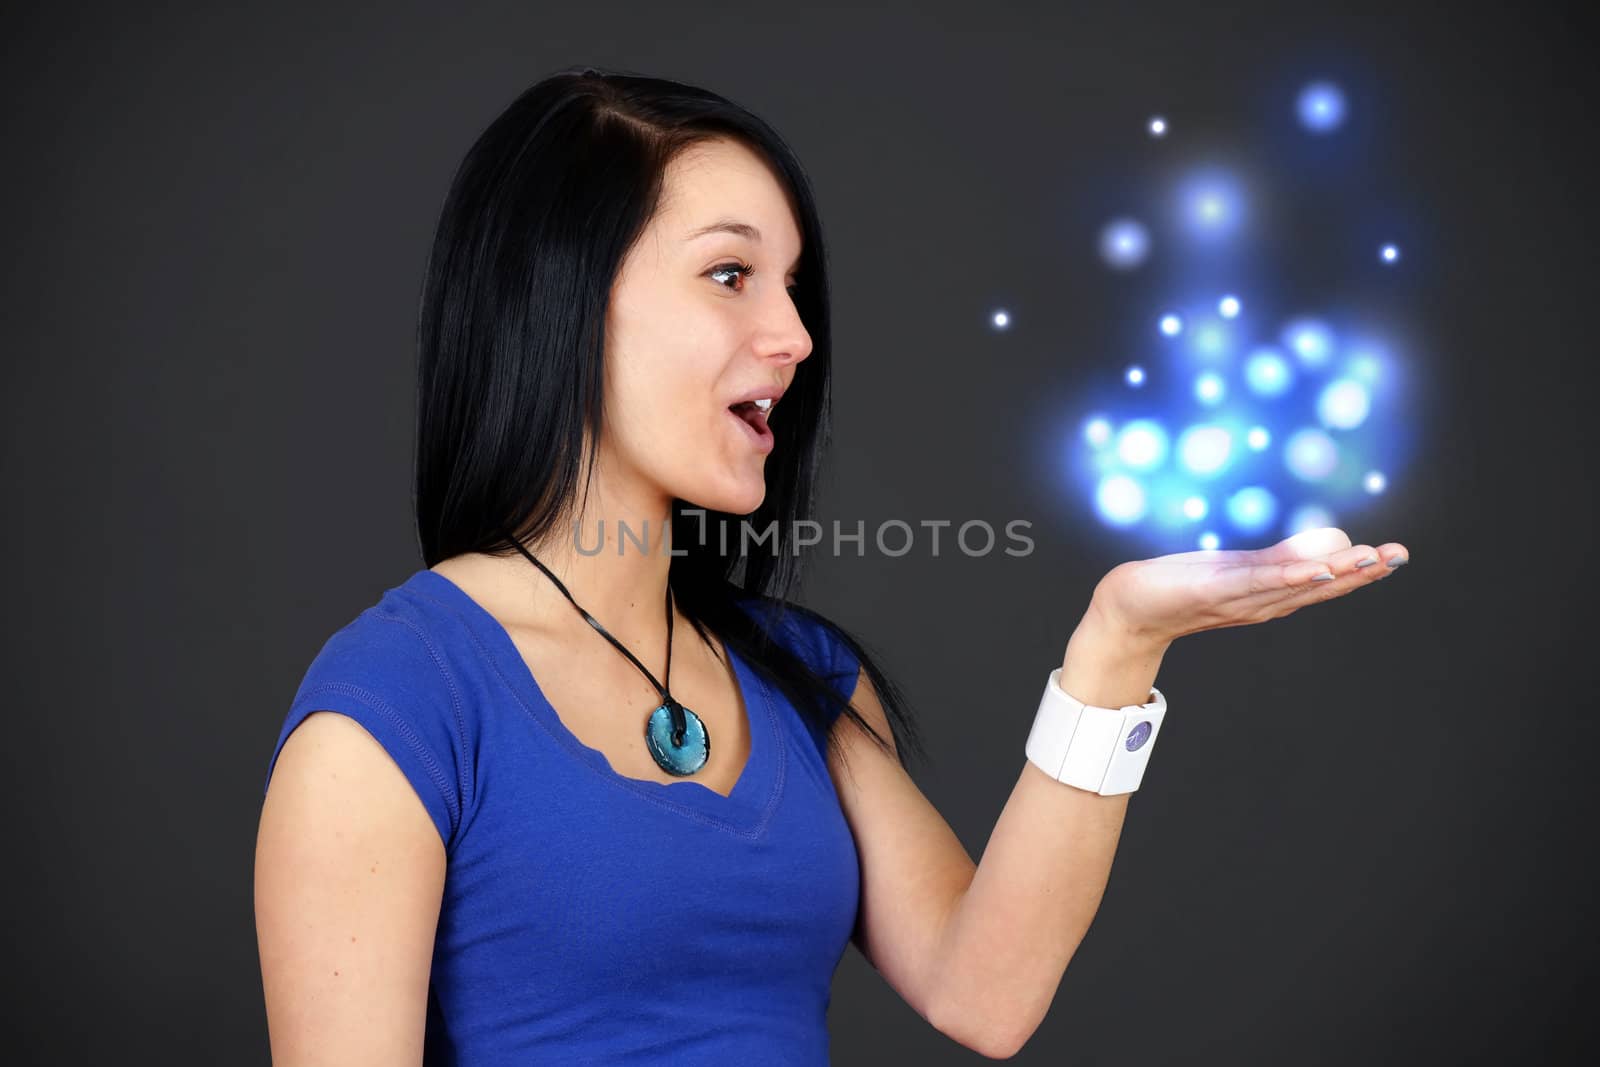 Profile portrait of an amazed young woman or student holding something up in her hand filled with magical lights, fun advertisement.